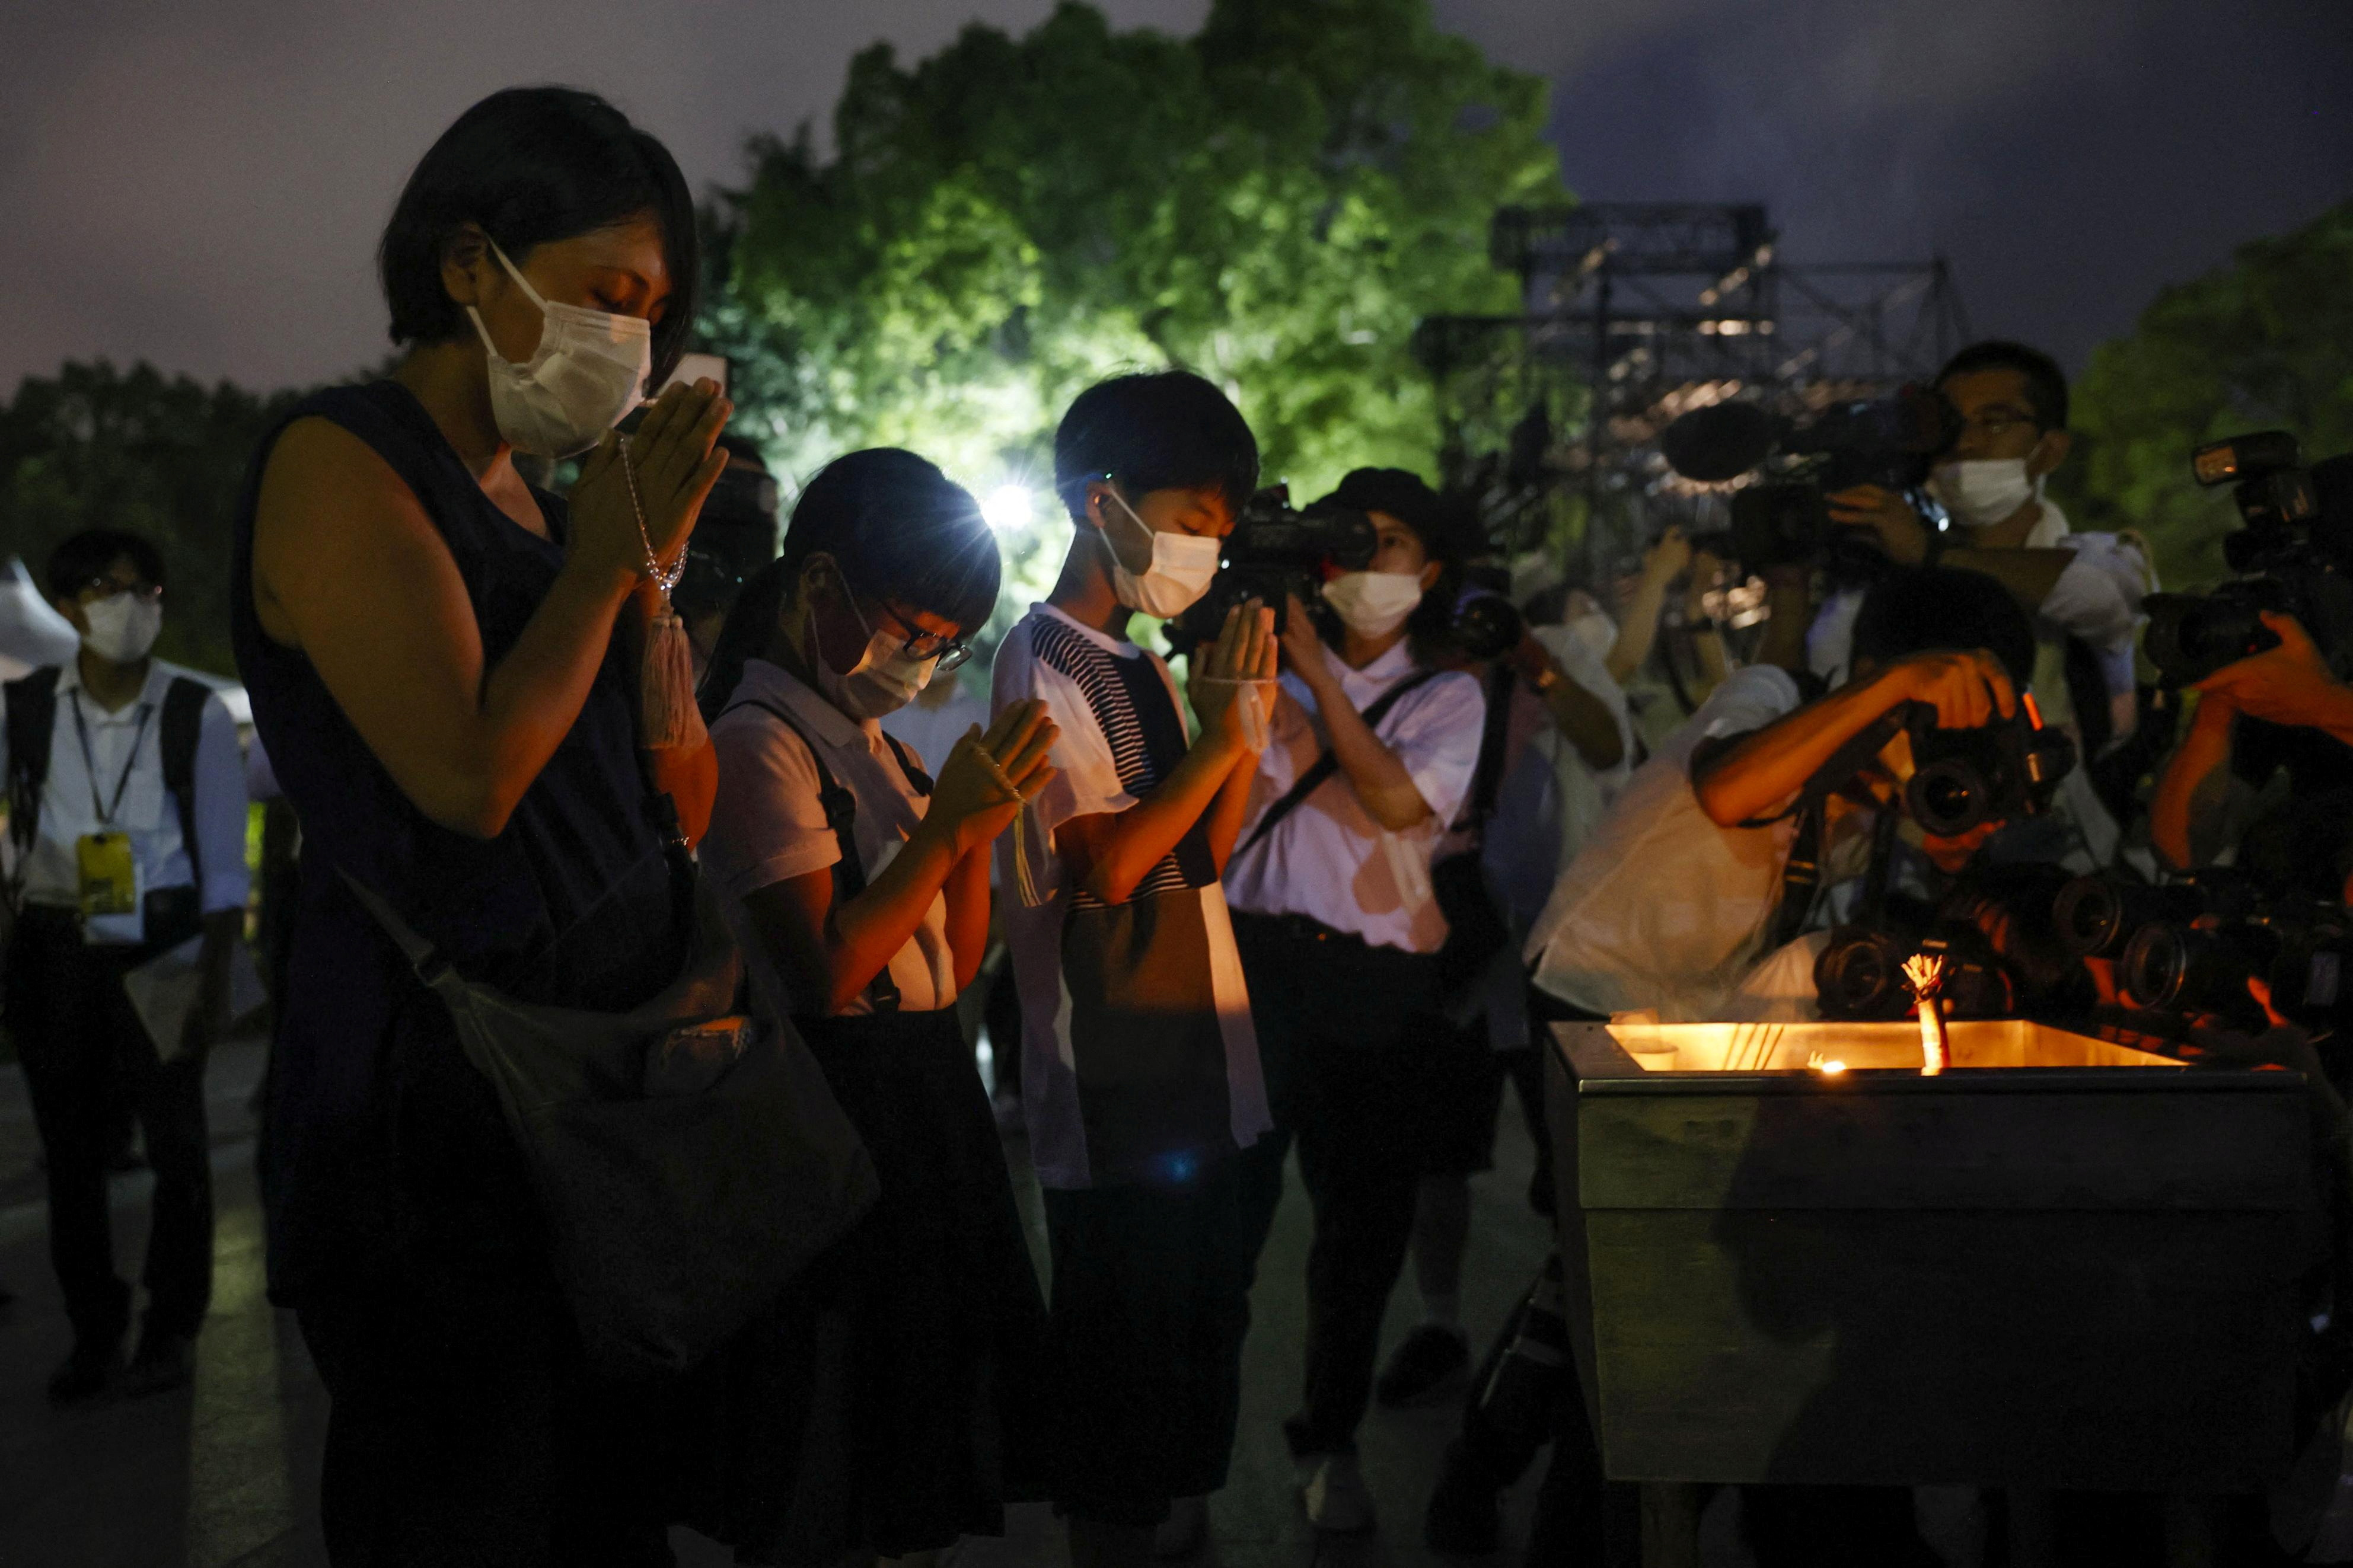 People pray in front of the cenotaph for the victims of the 1945 atomic bombing at Peace Memorial Park in Hiroshima, Japan